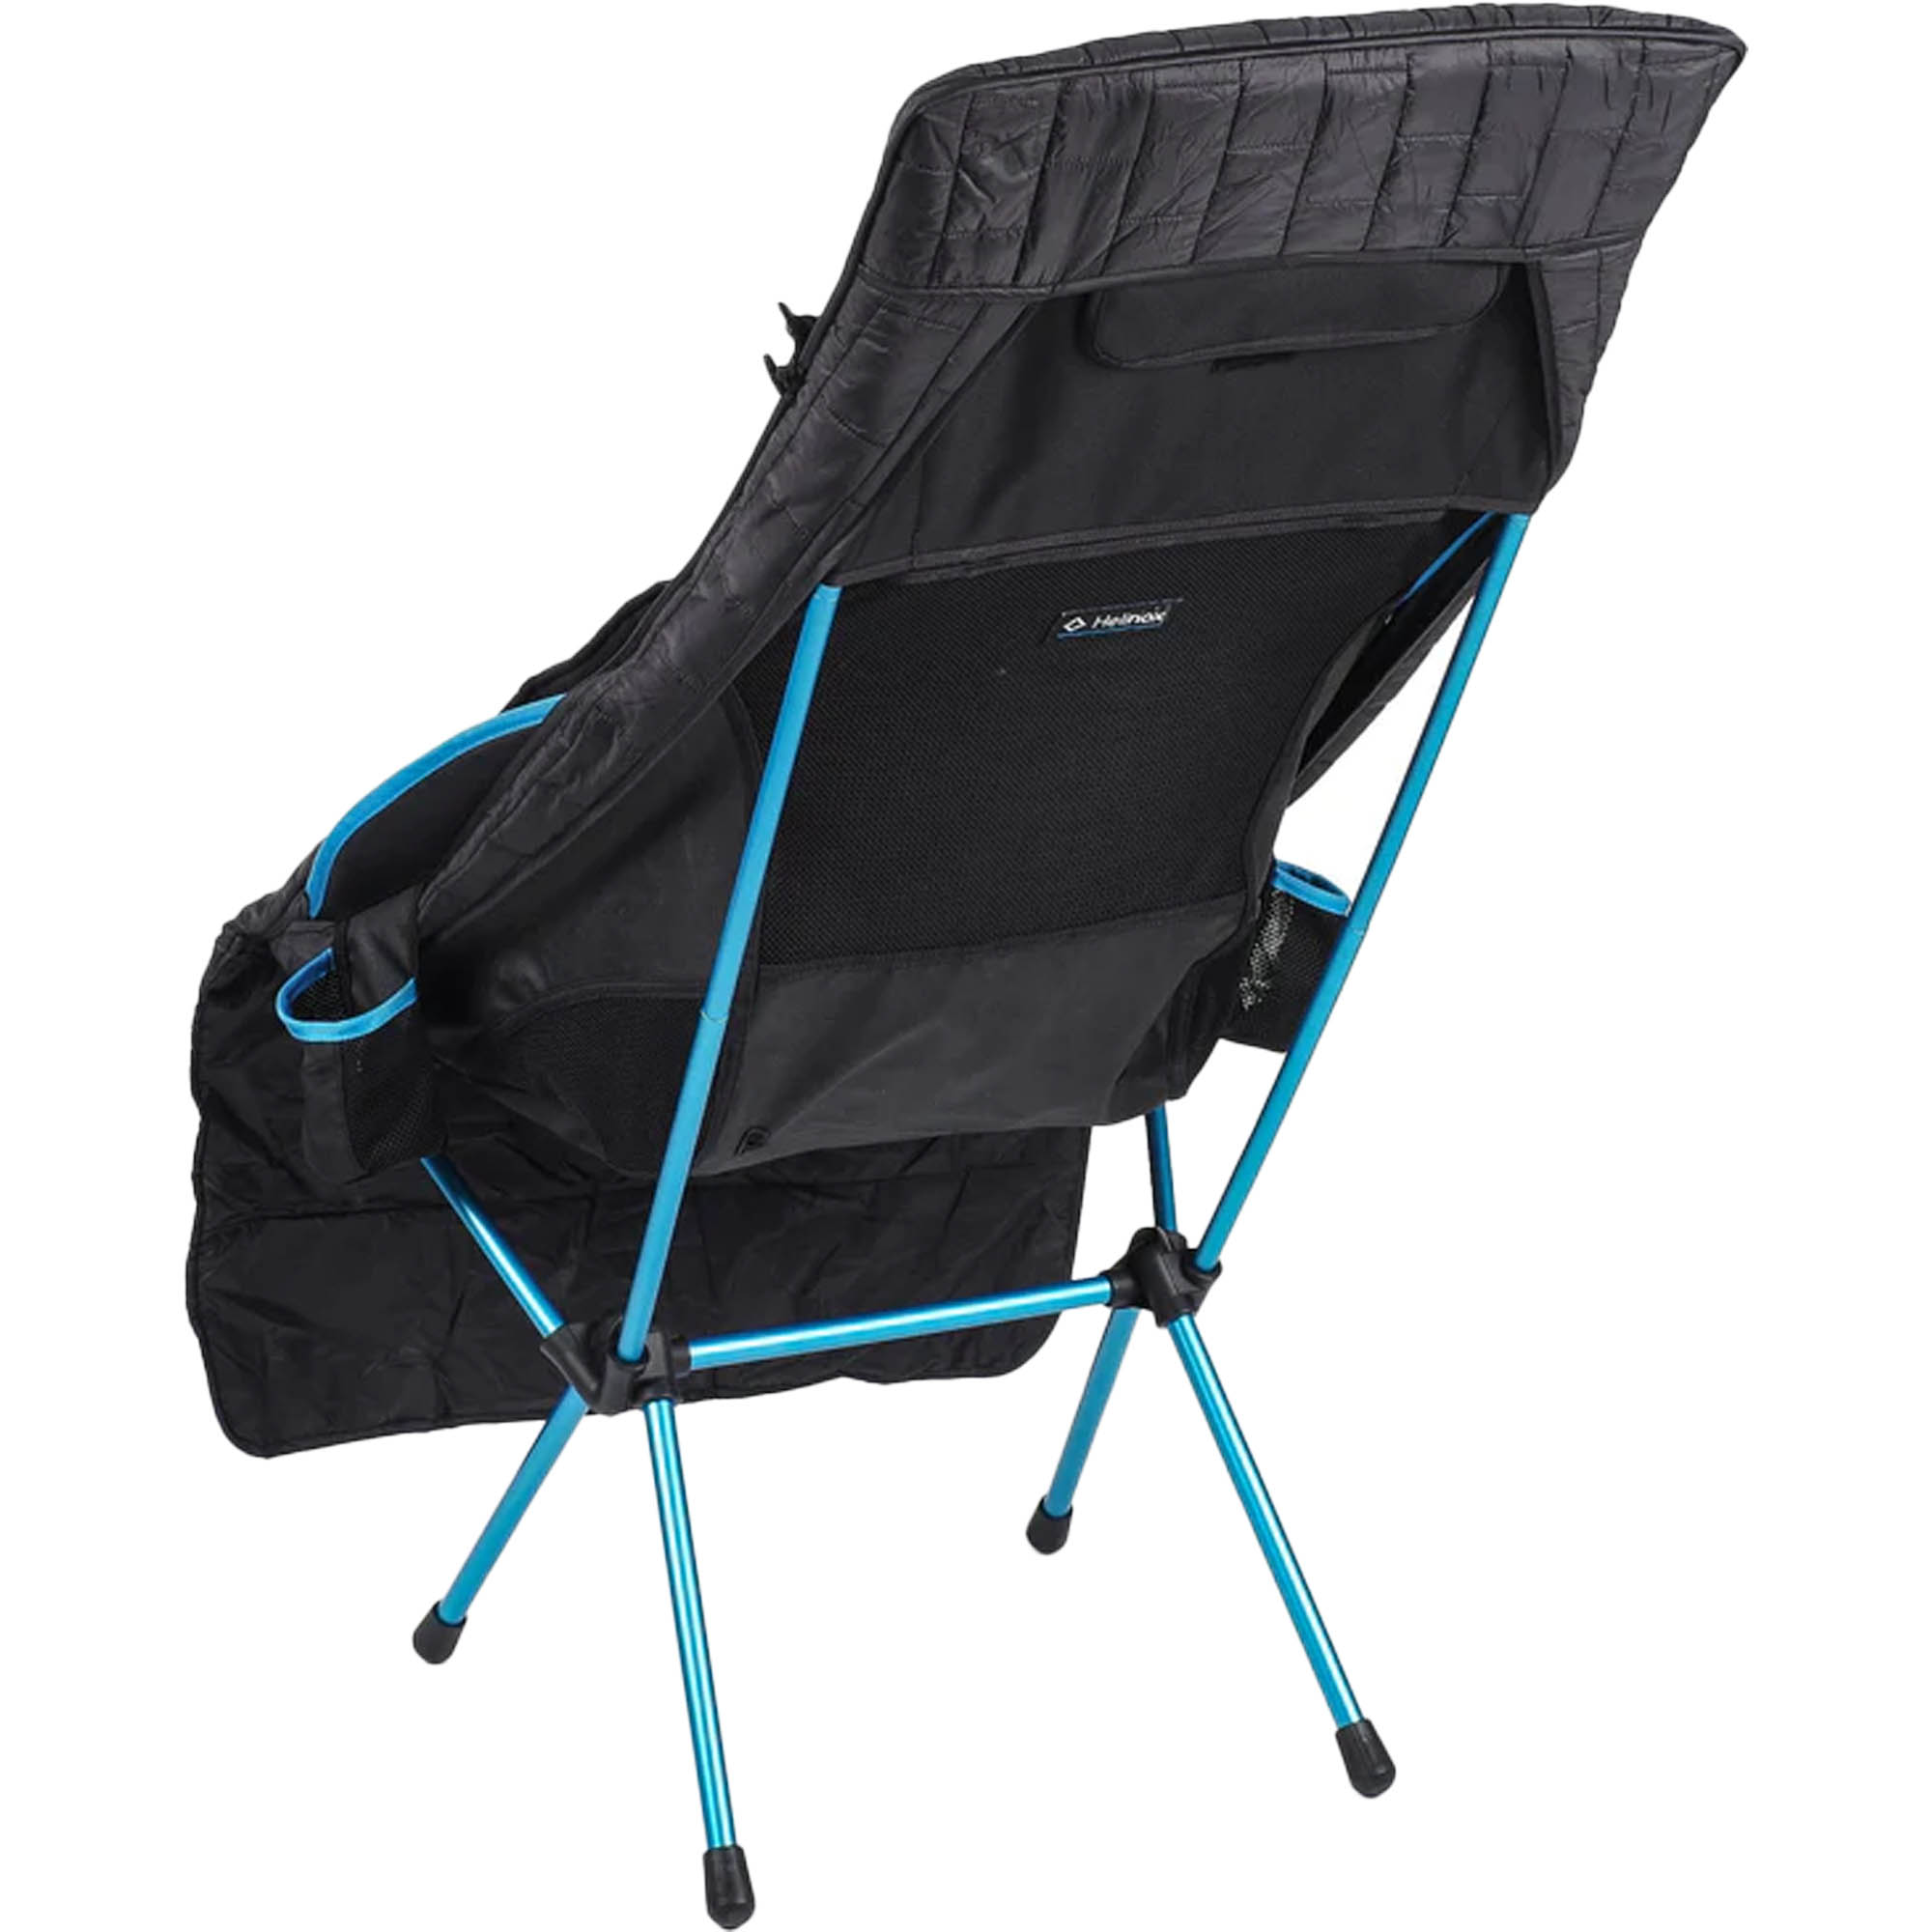 Helinox Toasty Deluxe Camp Chair Cover